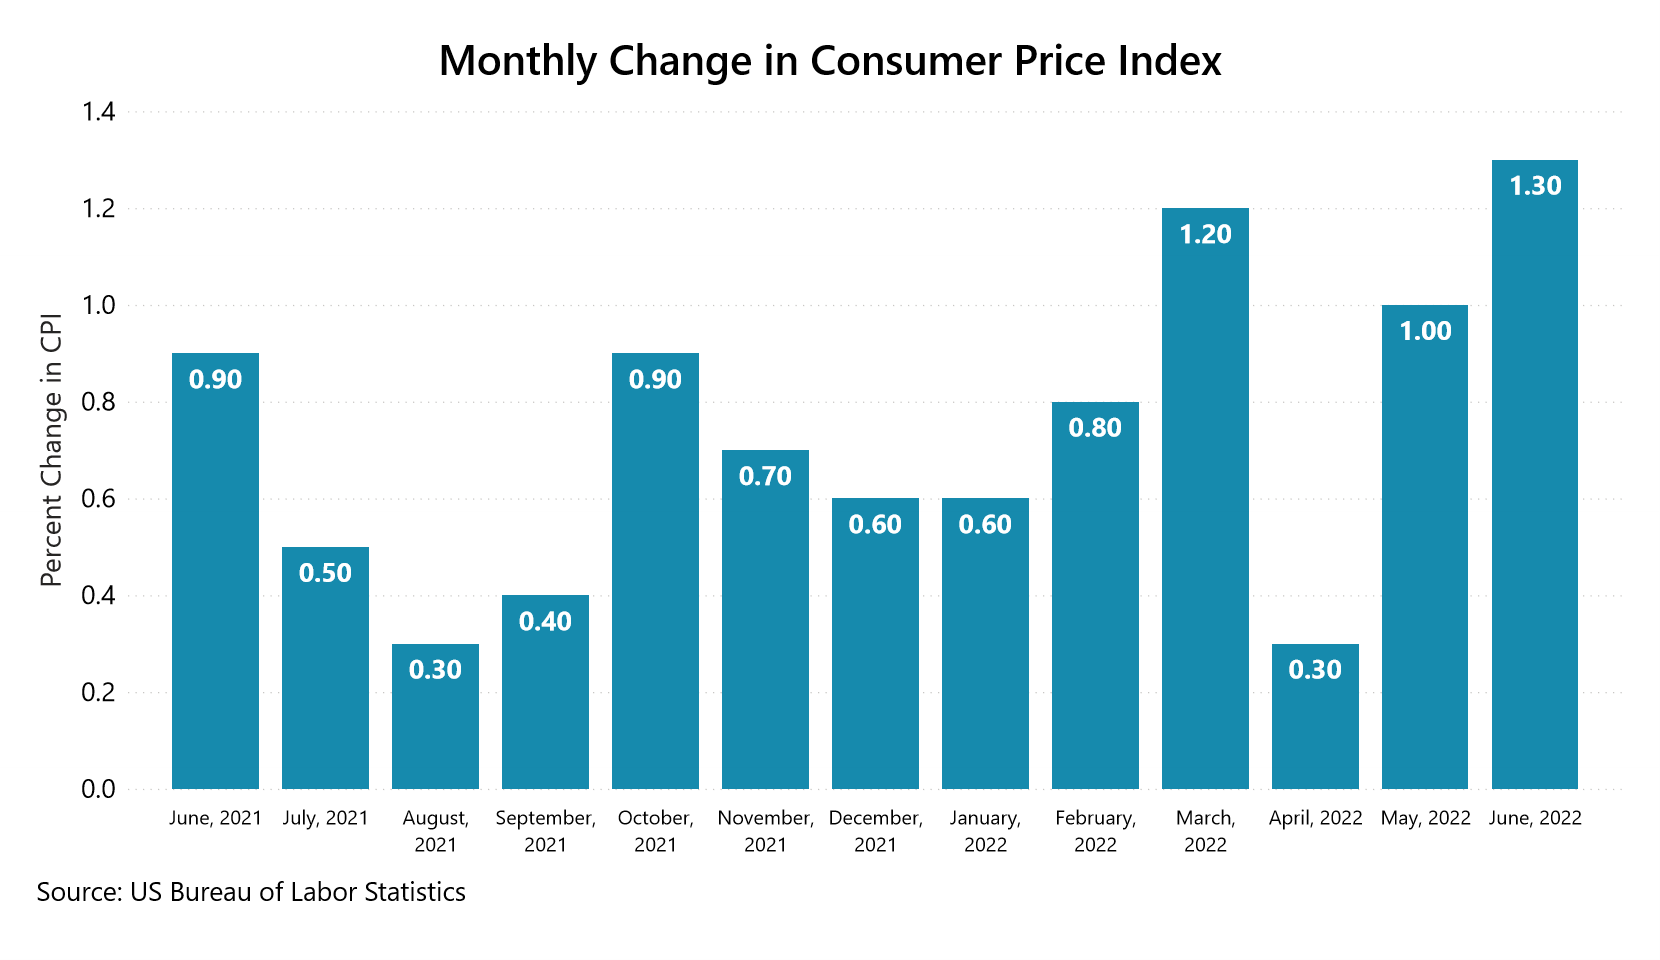 Monthly change in Consumer Price Index from June 2021 to June 2022